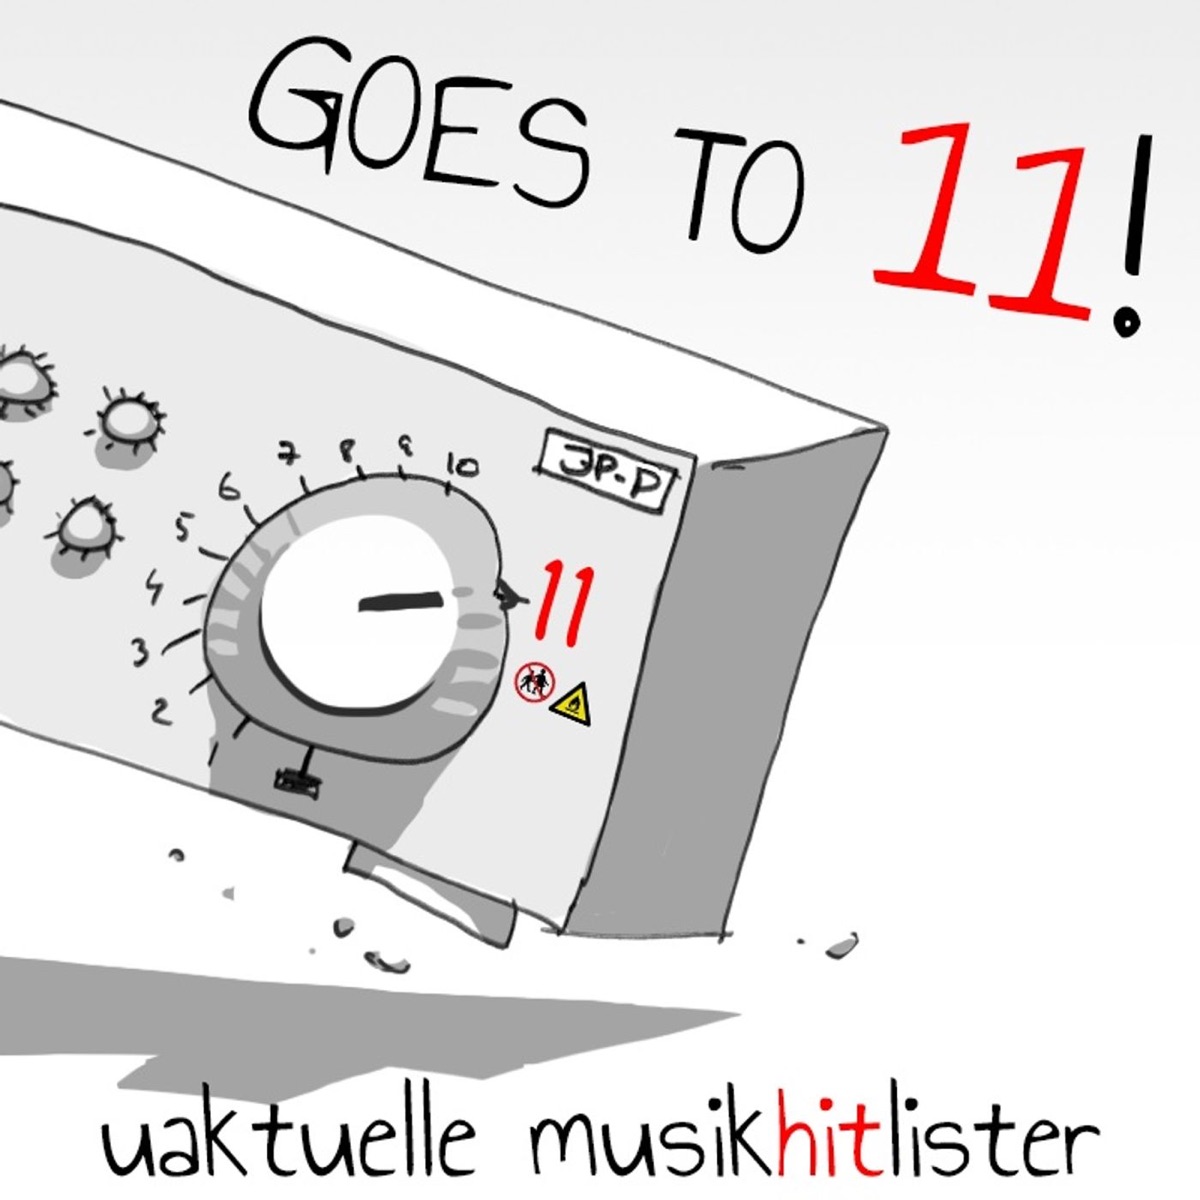 Goes to 11 - uaktuelle musikhitlister pic